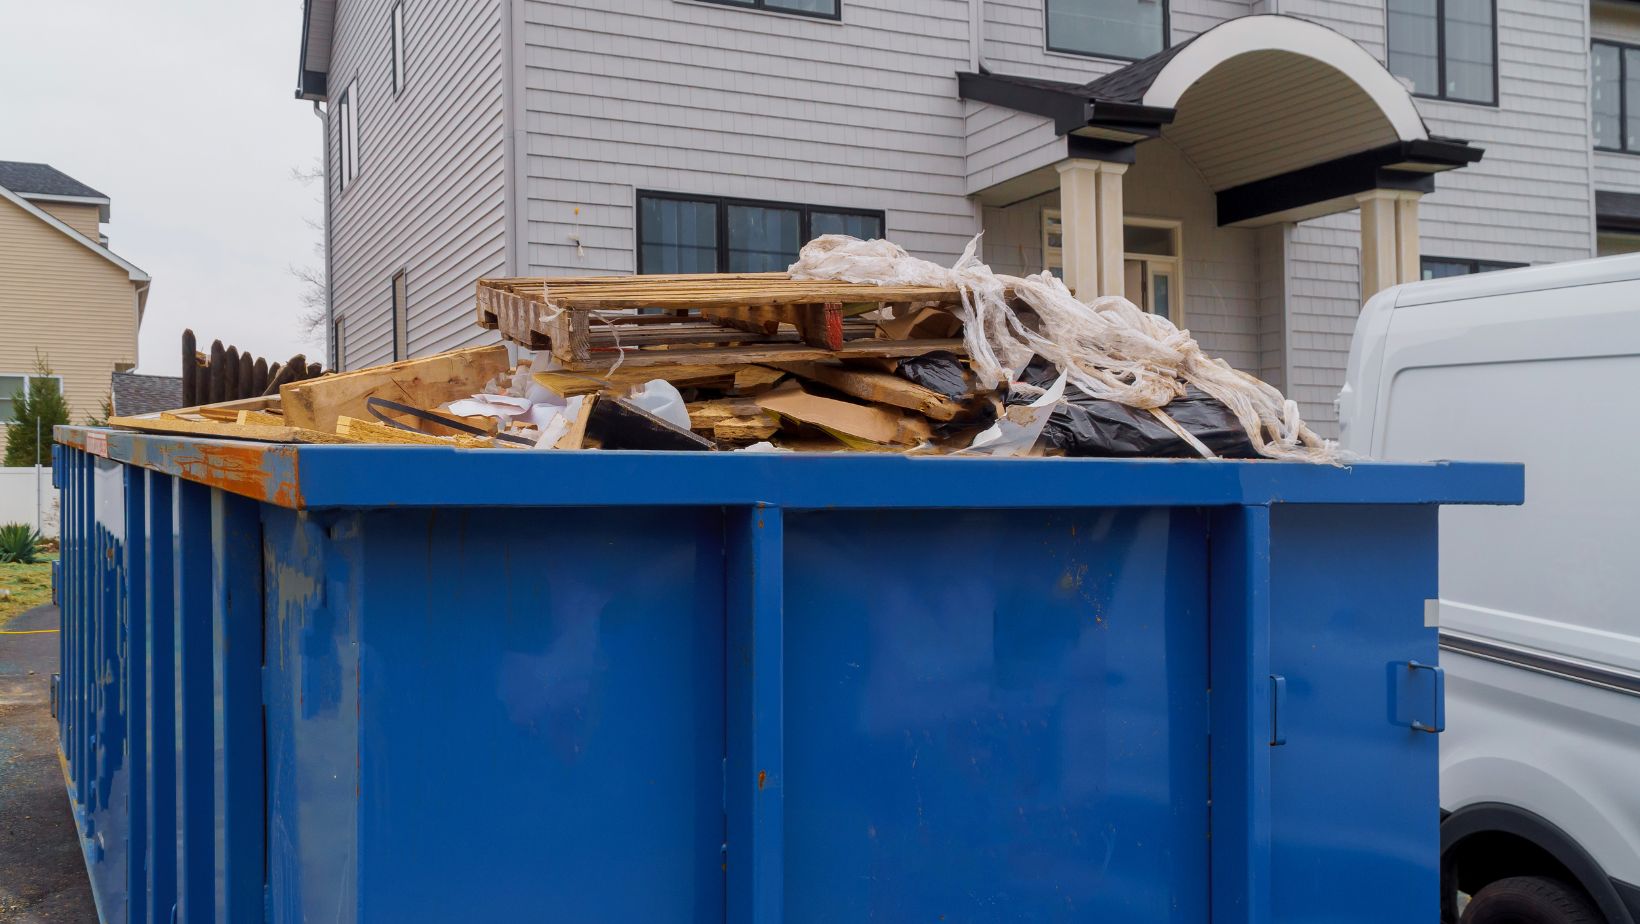 5 Easy Ways to Get Rid of Home Renovation Waste